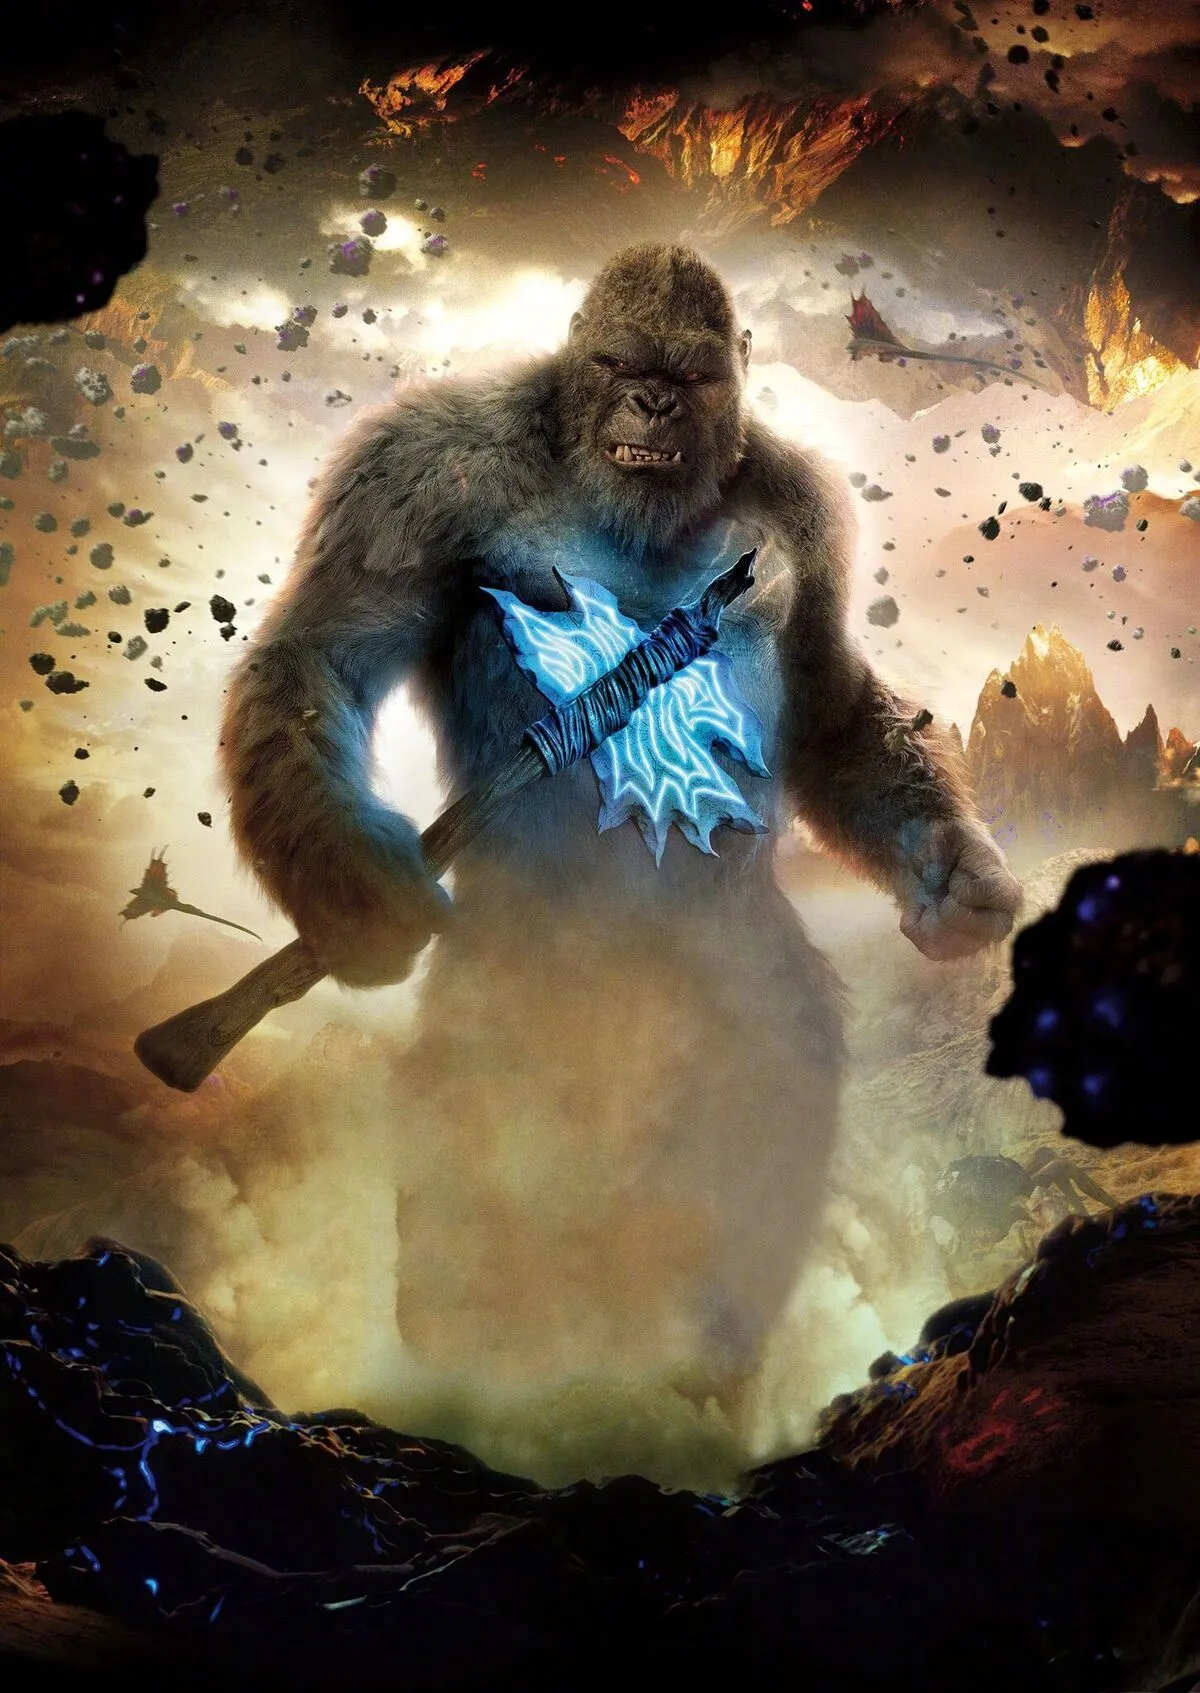 Disney+ is already developing a 'King Kong‎' live-action series | FMV6